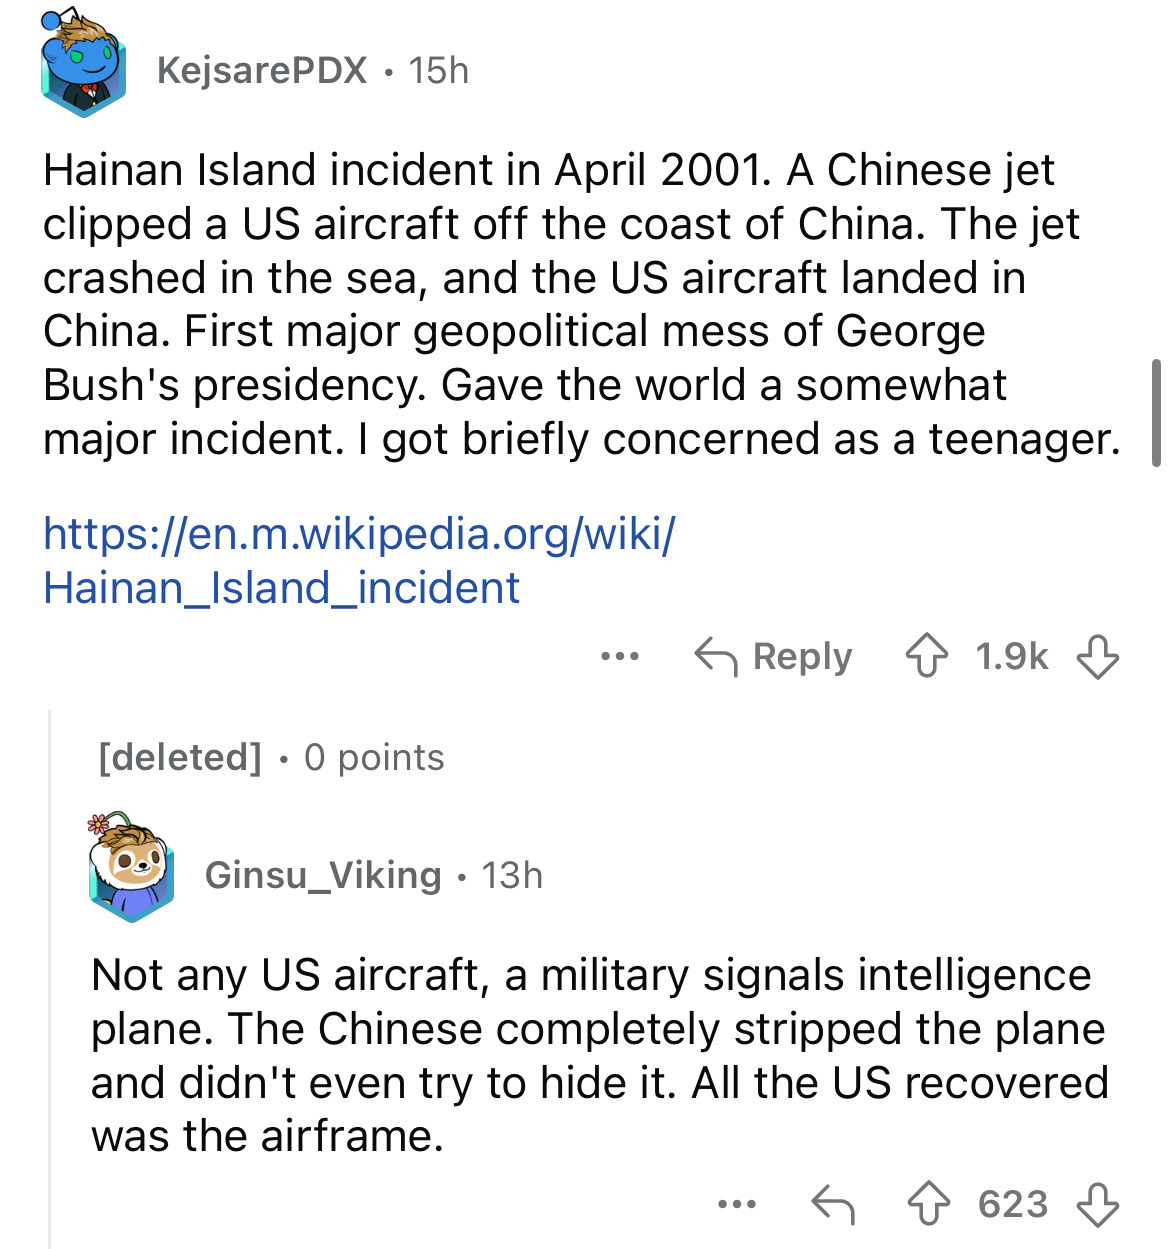 screenshot - KejsarePDX 15h Hainan Island incident in . A Chinese jet clipped a Us aircraft off the coast of China. The jet crashed in the sea, and the Us aircraft landed in China. First major geopolitical mess of George Bush's presidency. Gave the world 